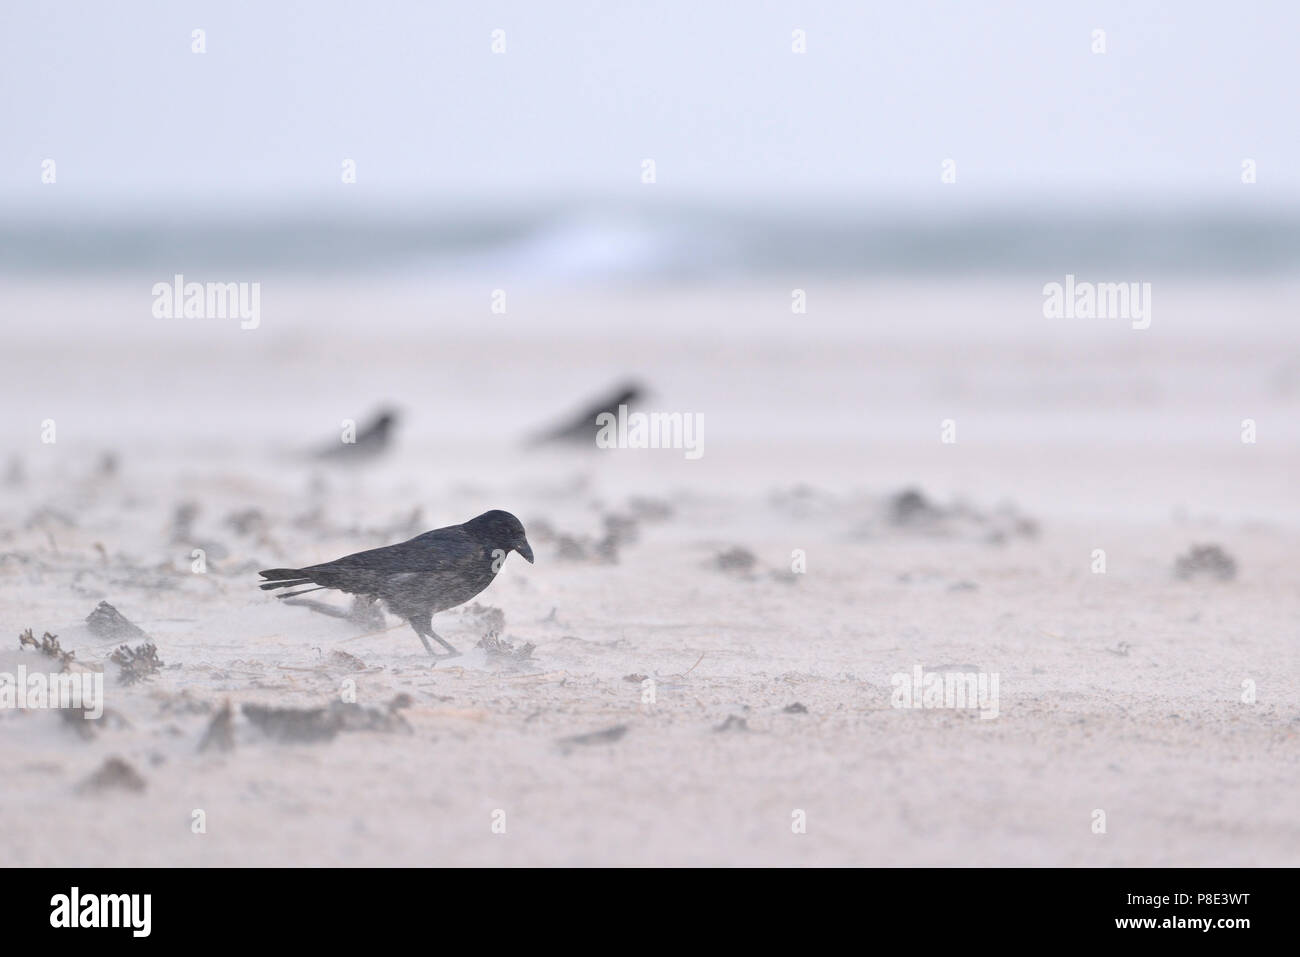 Carrion crows (Corvus corone) in a sandstorm looking for food, Helgoland Island, Schleswig-Holstein, Germany Stock Photo